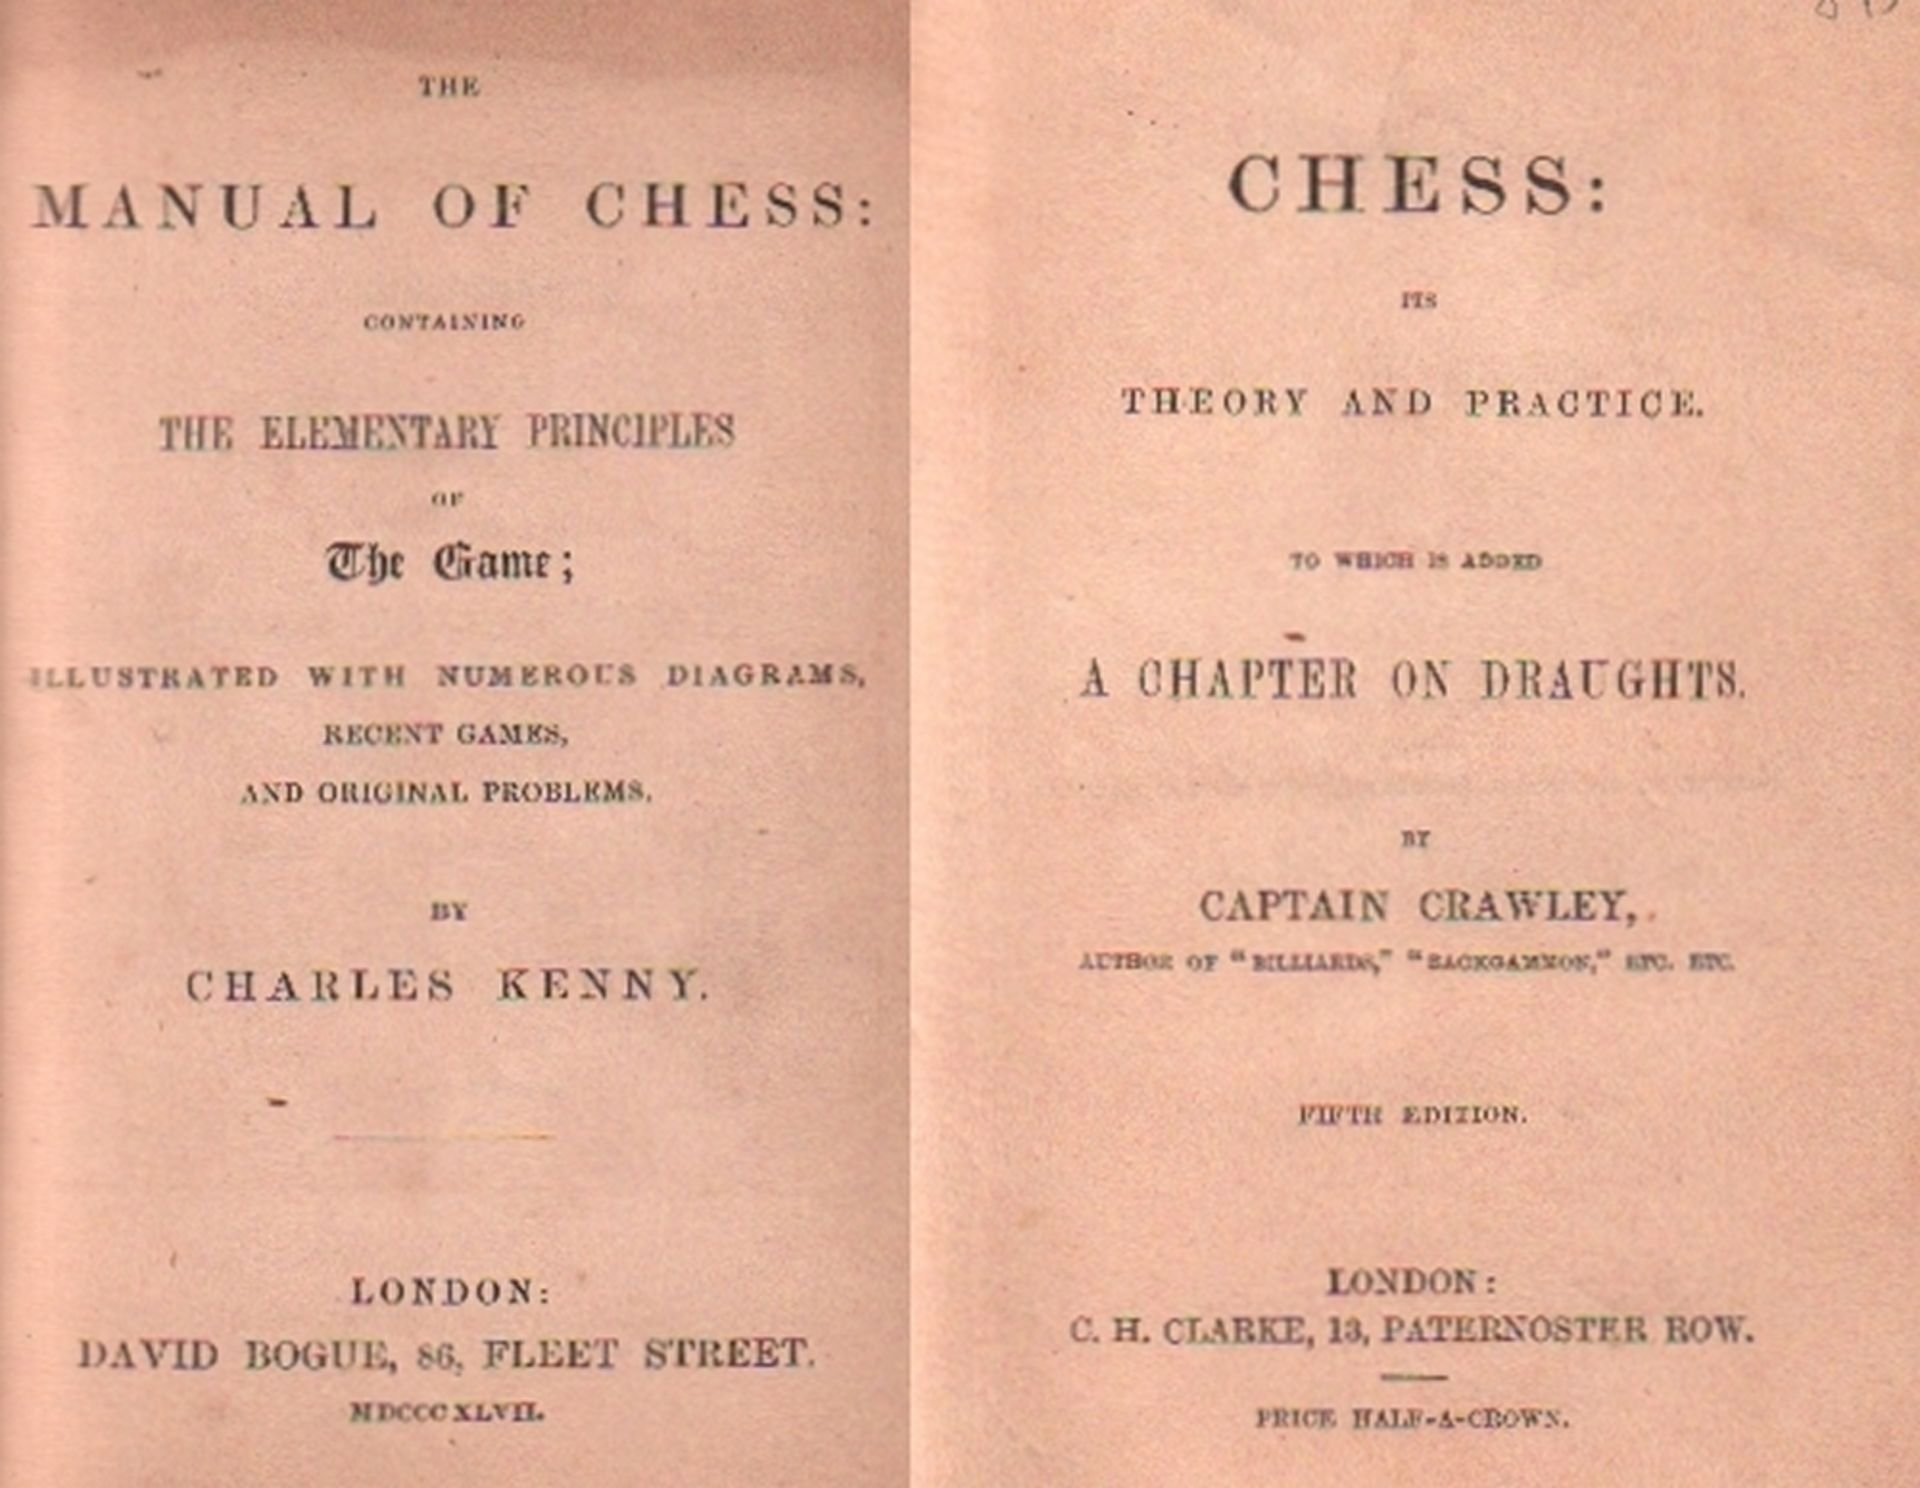 Kenny, Charles. The manual of chess: containing the elementary principles of the game ... recent